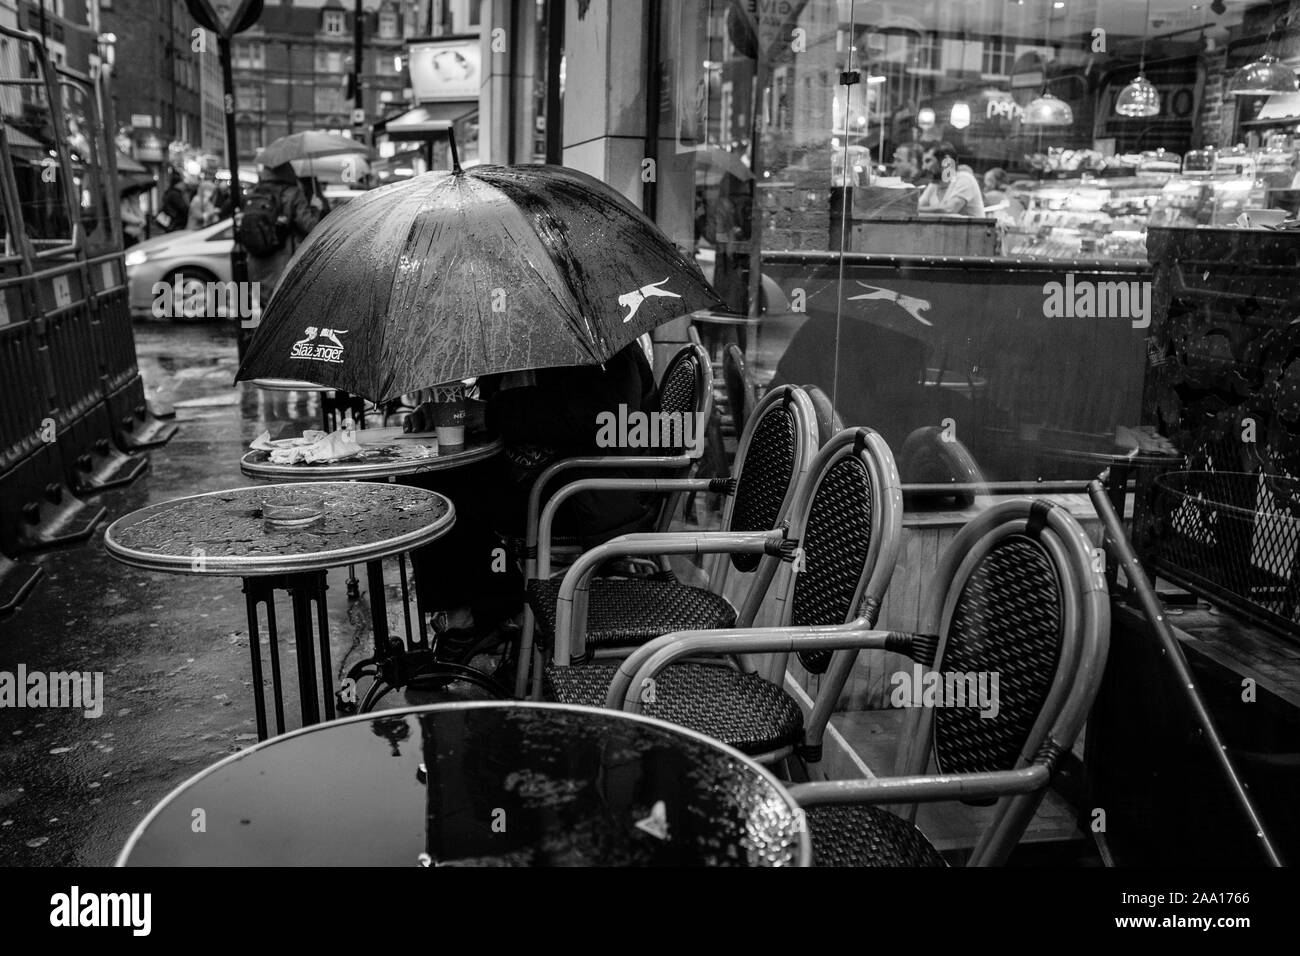 London black and white street photography: Customer sits outside cafe under umbrella during downpour, Frith street, London, UK Stock Photo